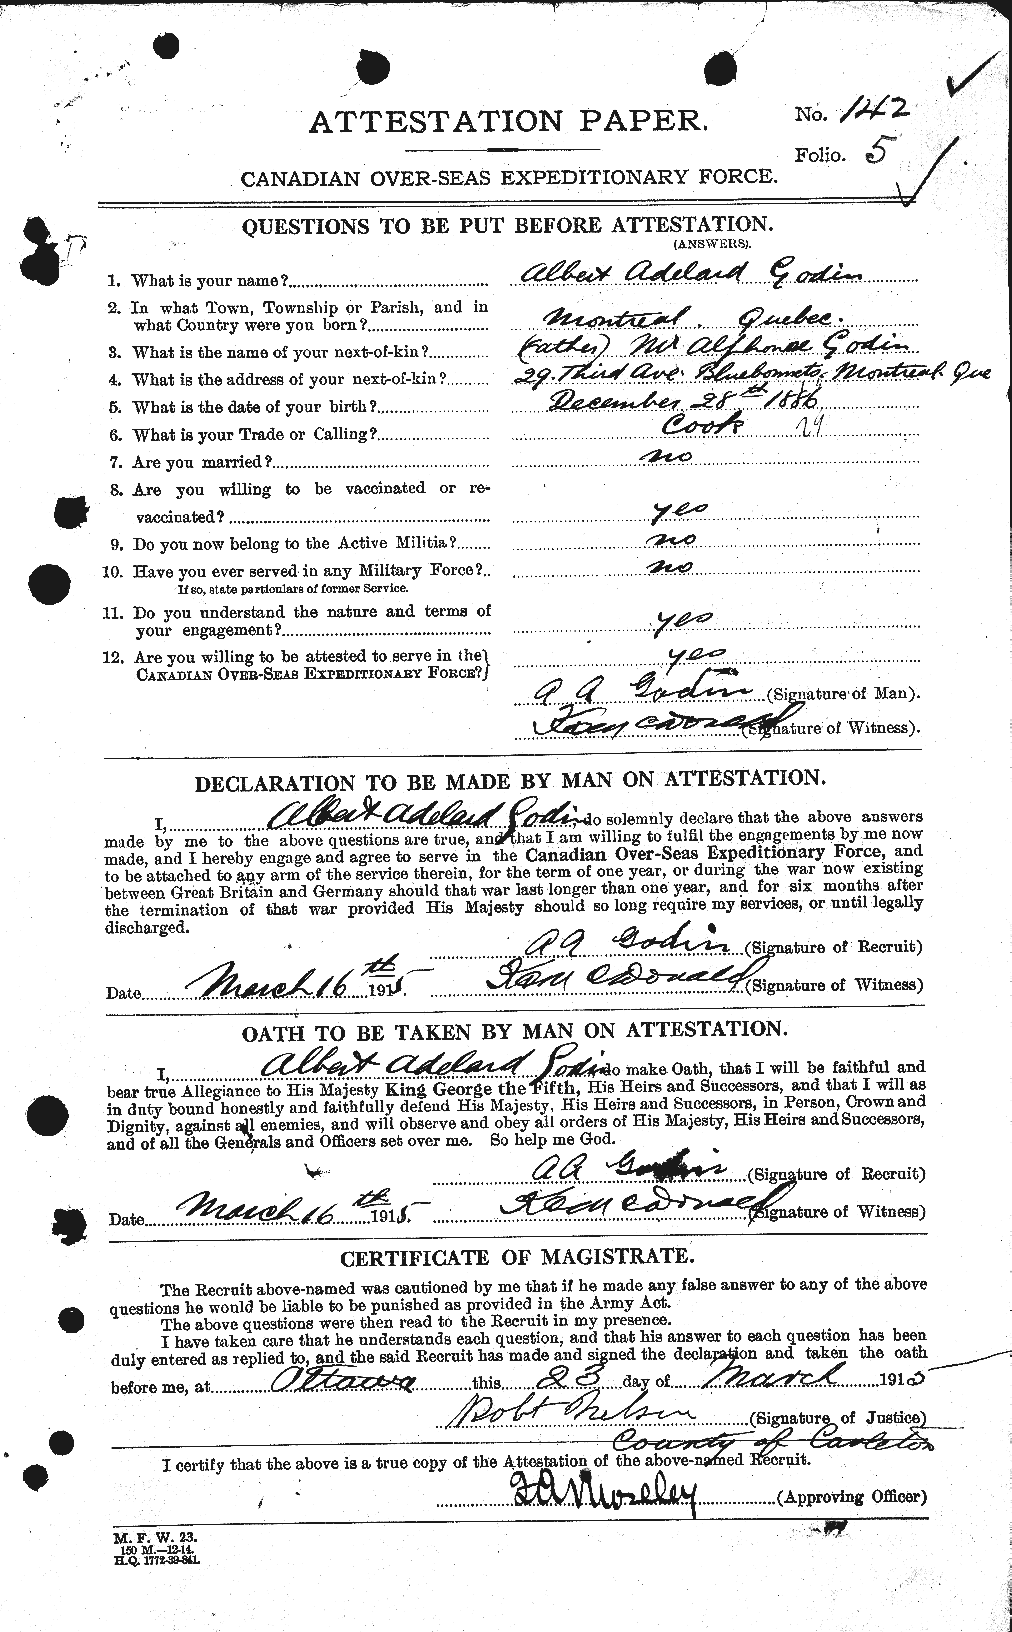 Personnel Records of the First World War - CEF 354483a